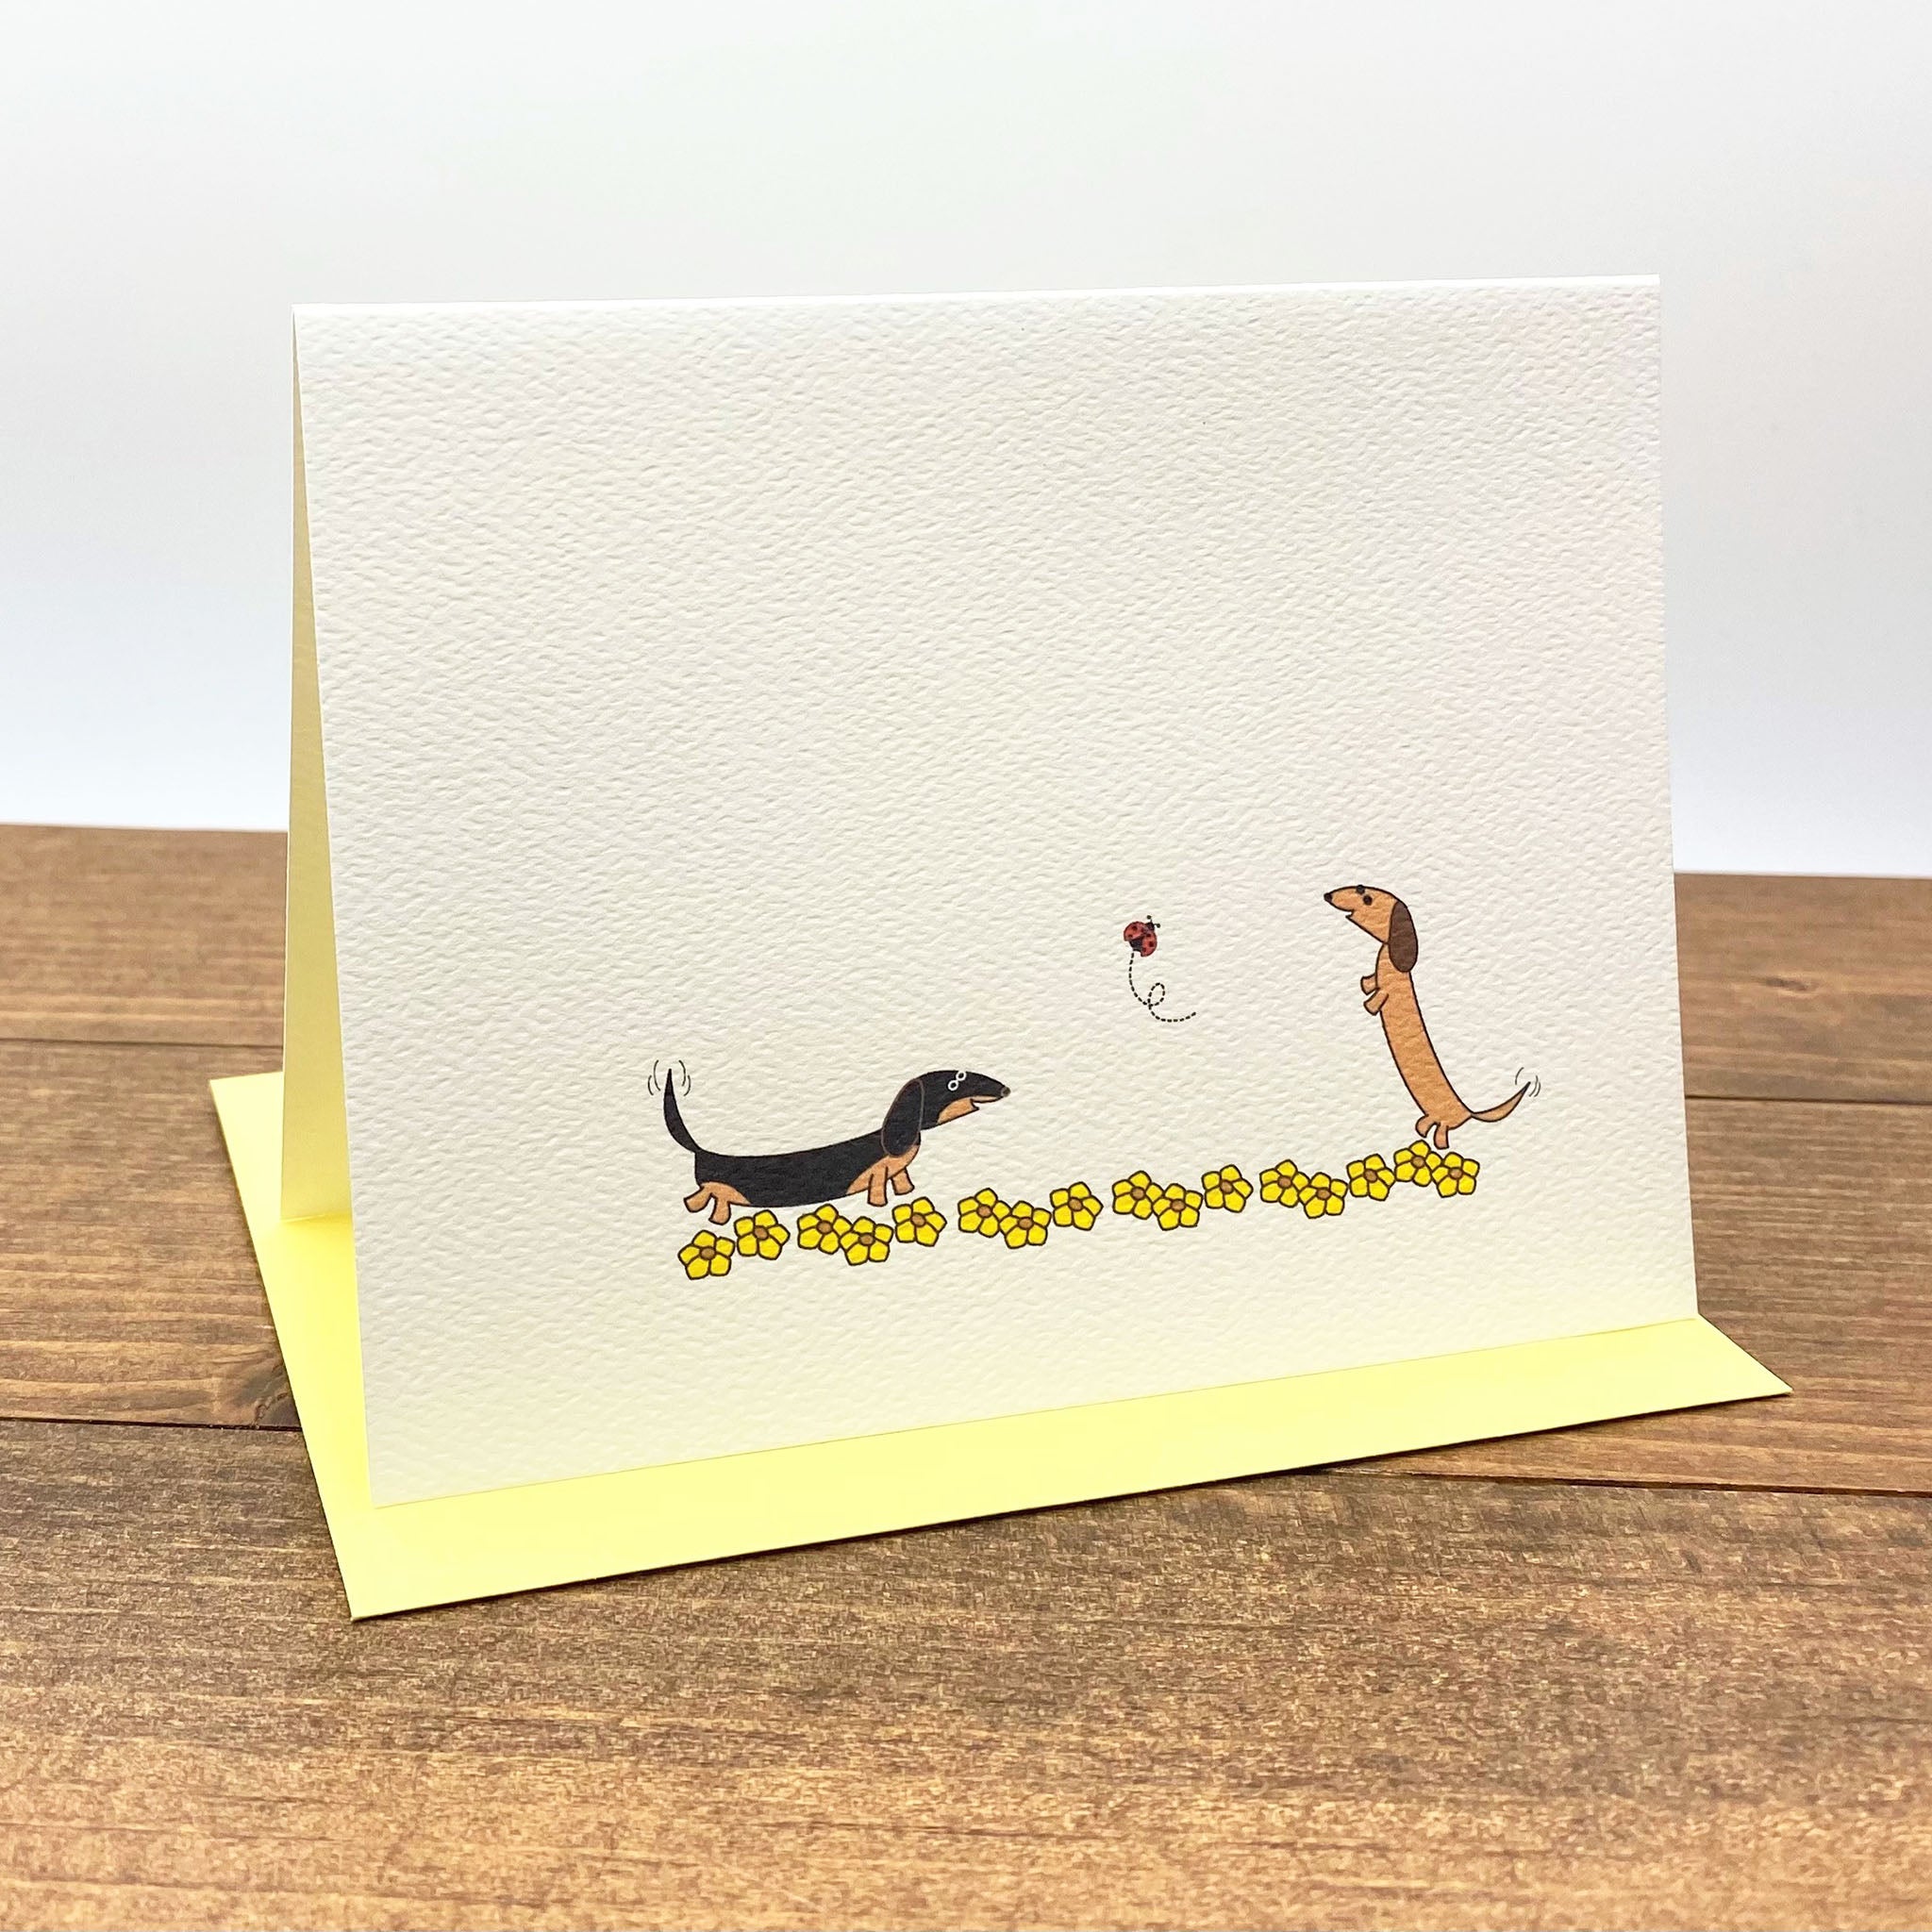 Note card with dachshunds playing with ladybug in field of yellow flowers.